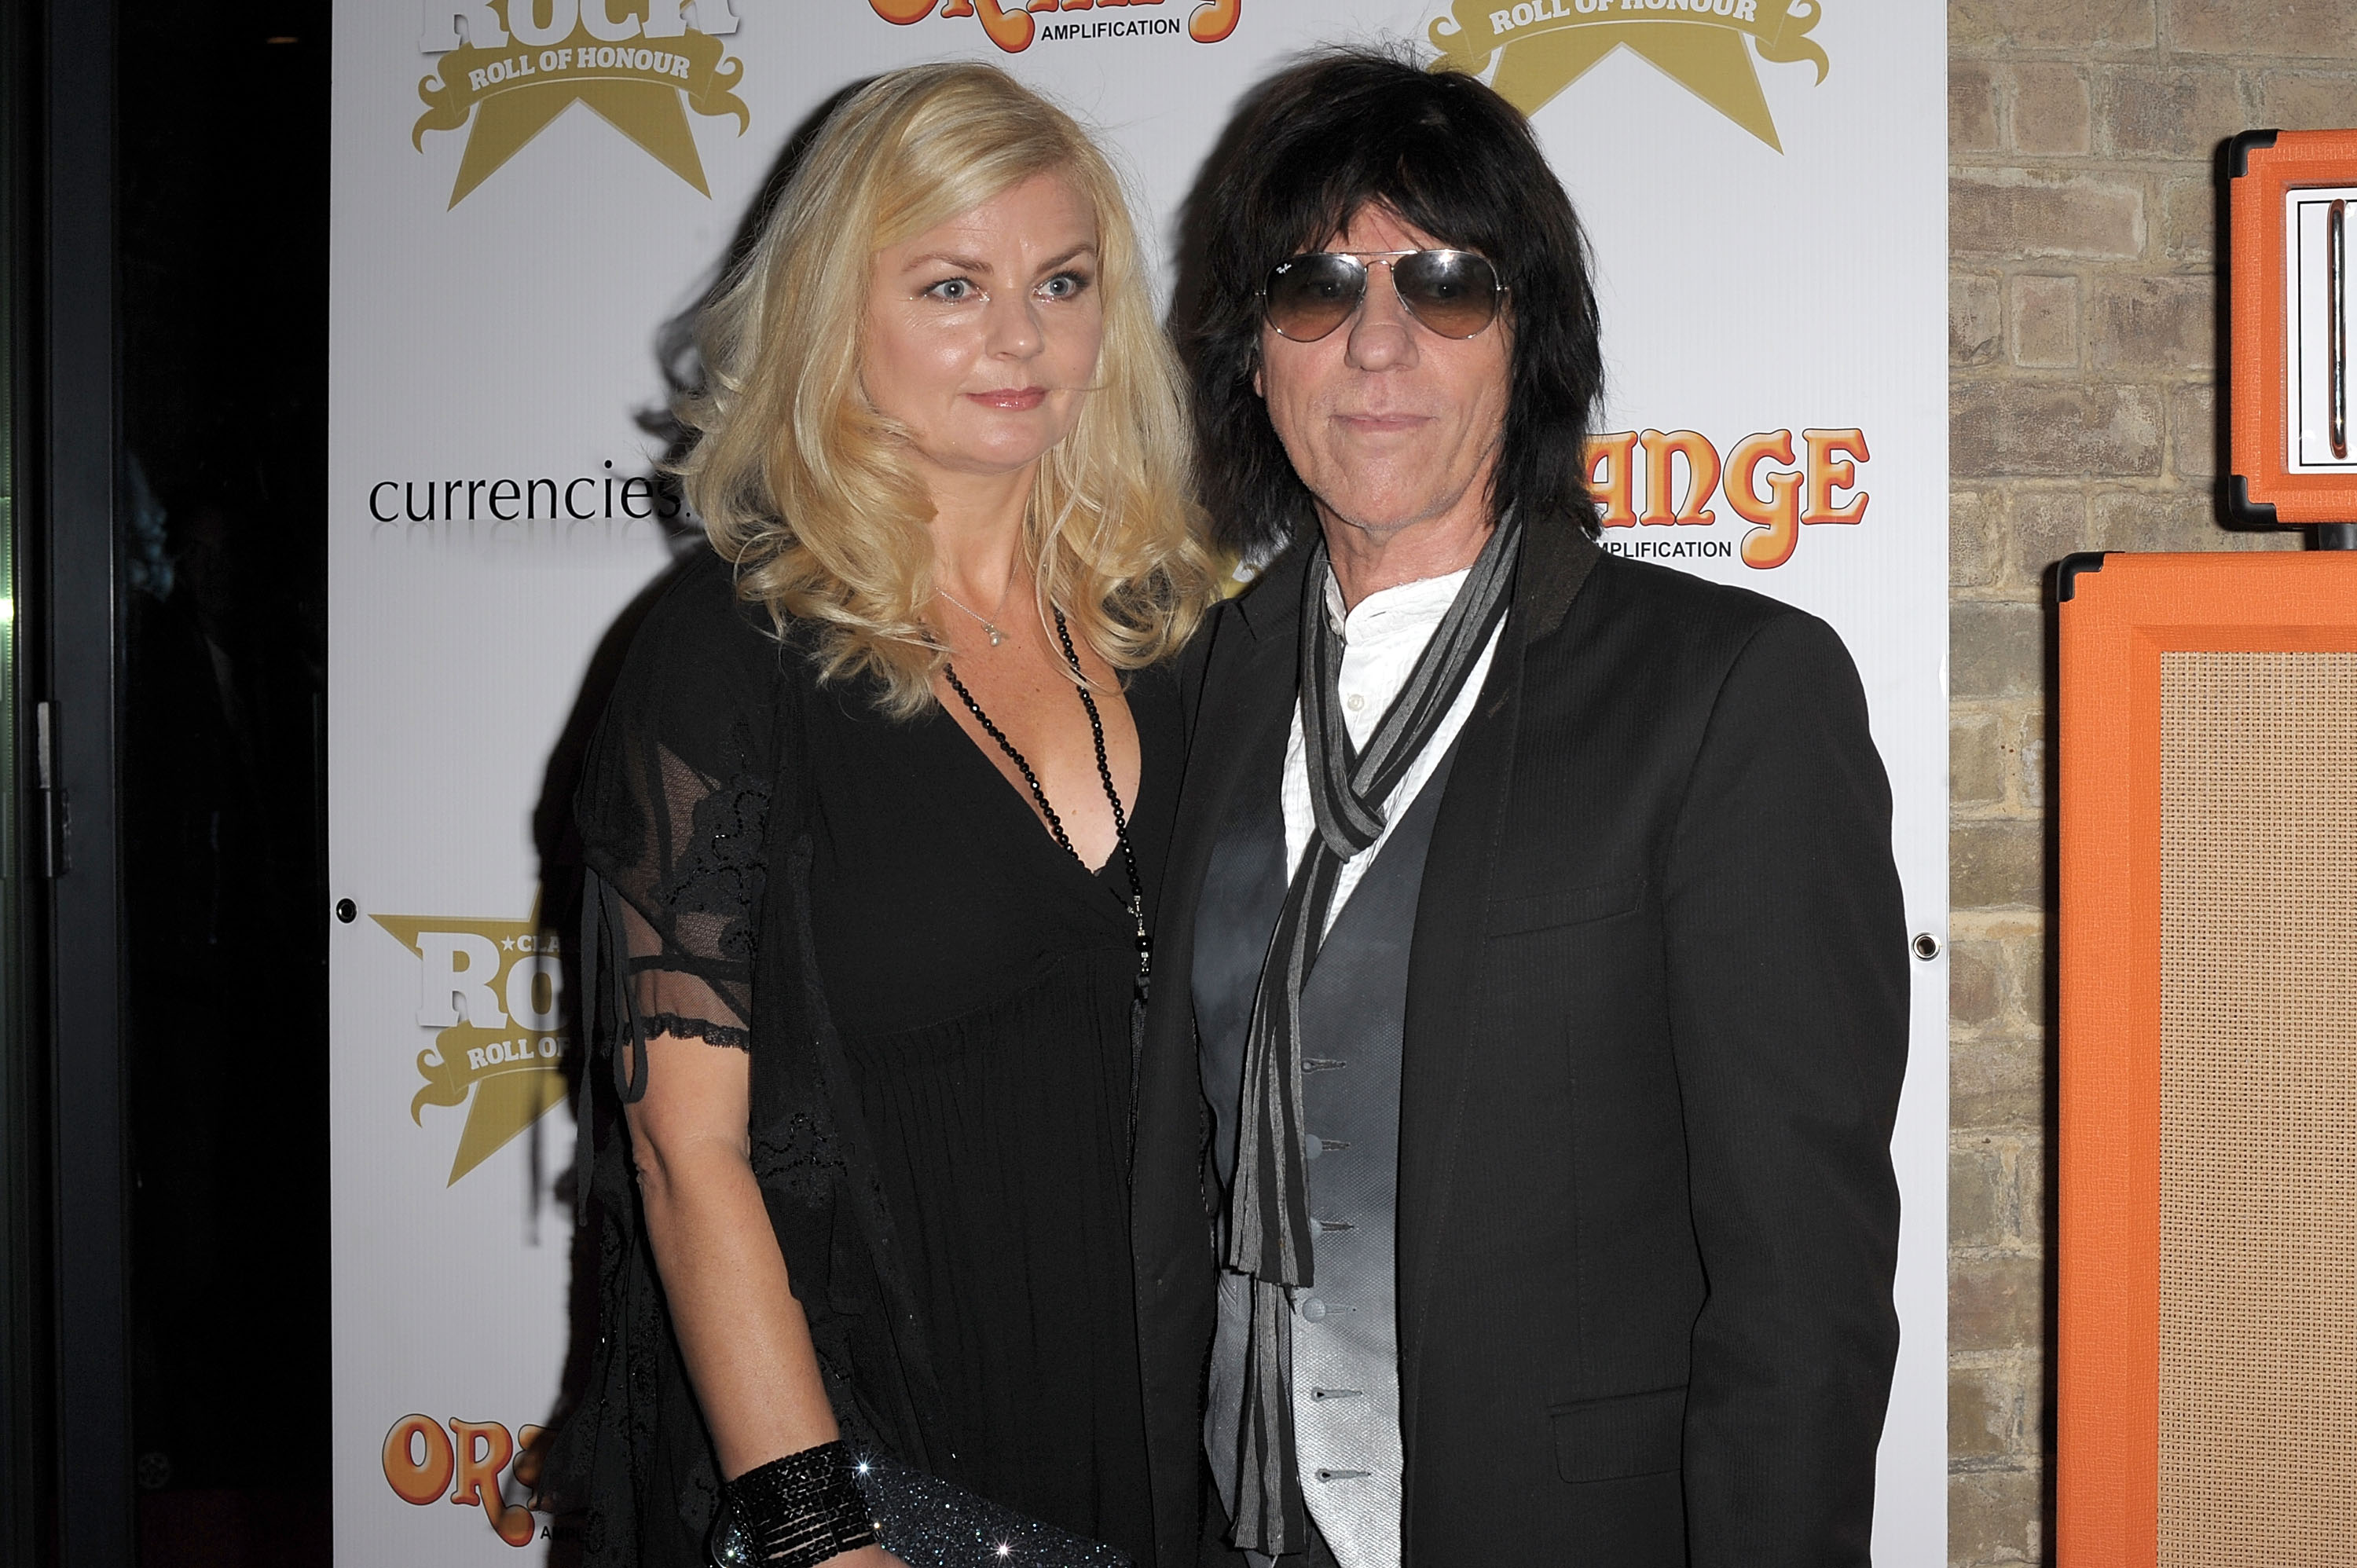 Sandra Cash and Jeff Beck pose for photos at The 'Classic Rock Roll of Honour' honouring rock's biggest icons at The Roundhouse on November 9, 2011, in London, England | Source: Getty Images